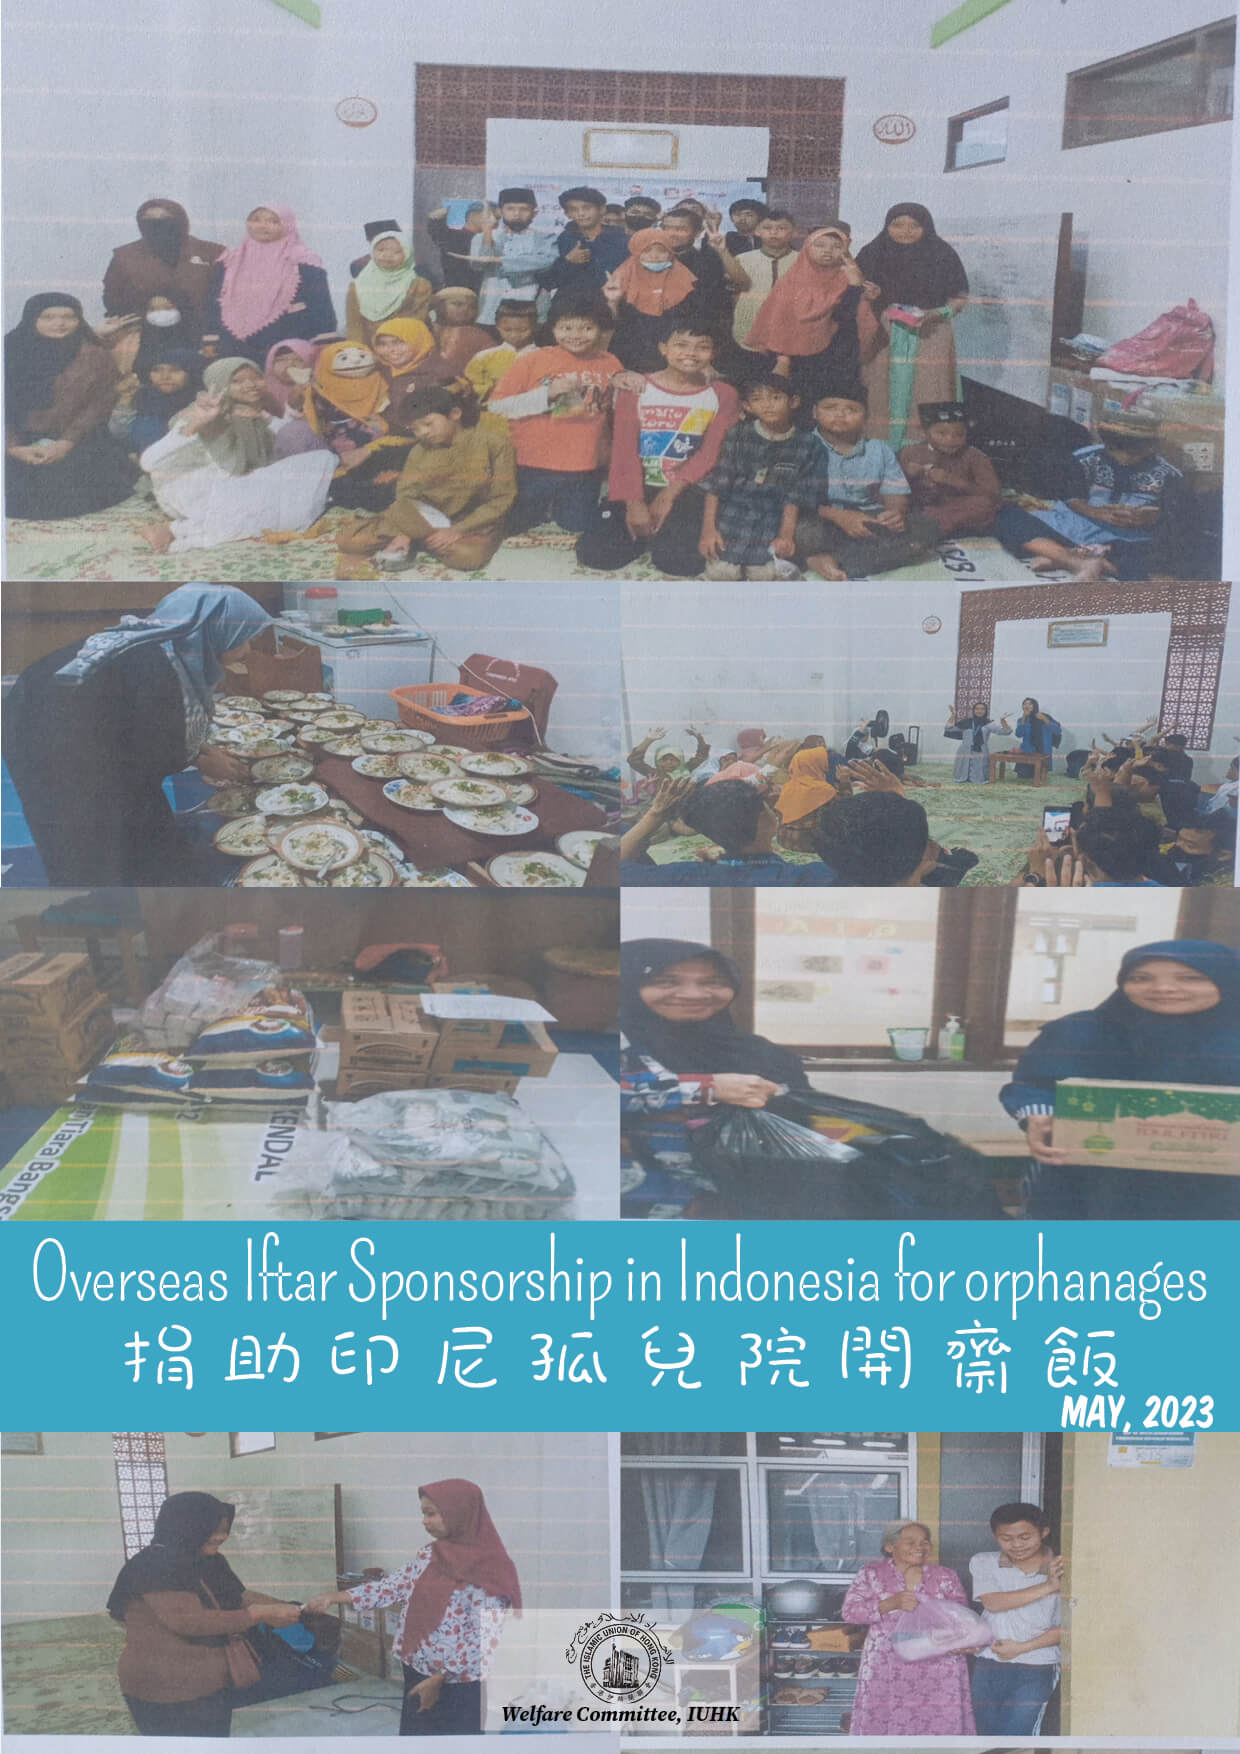 Overseas Iftar Sponsorship in Indonesia for orphanages